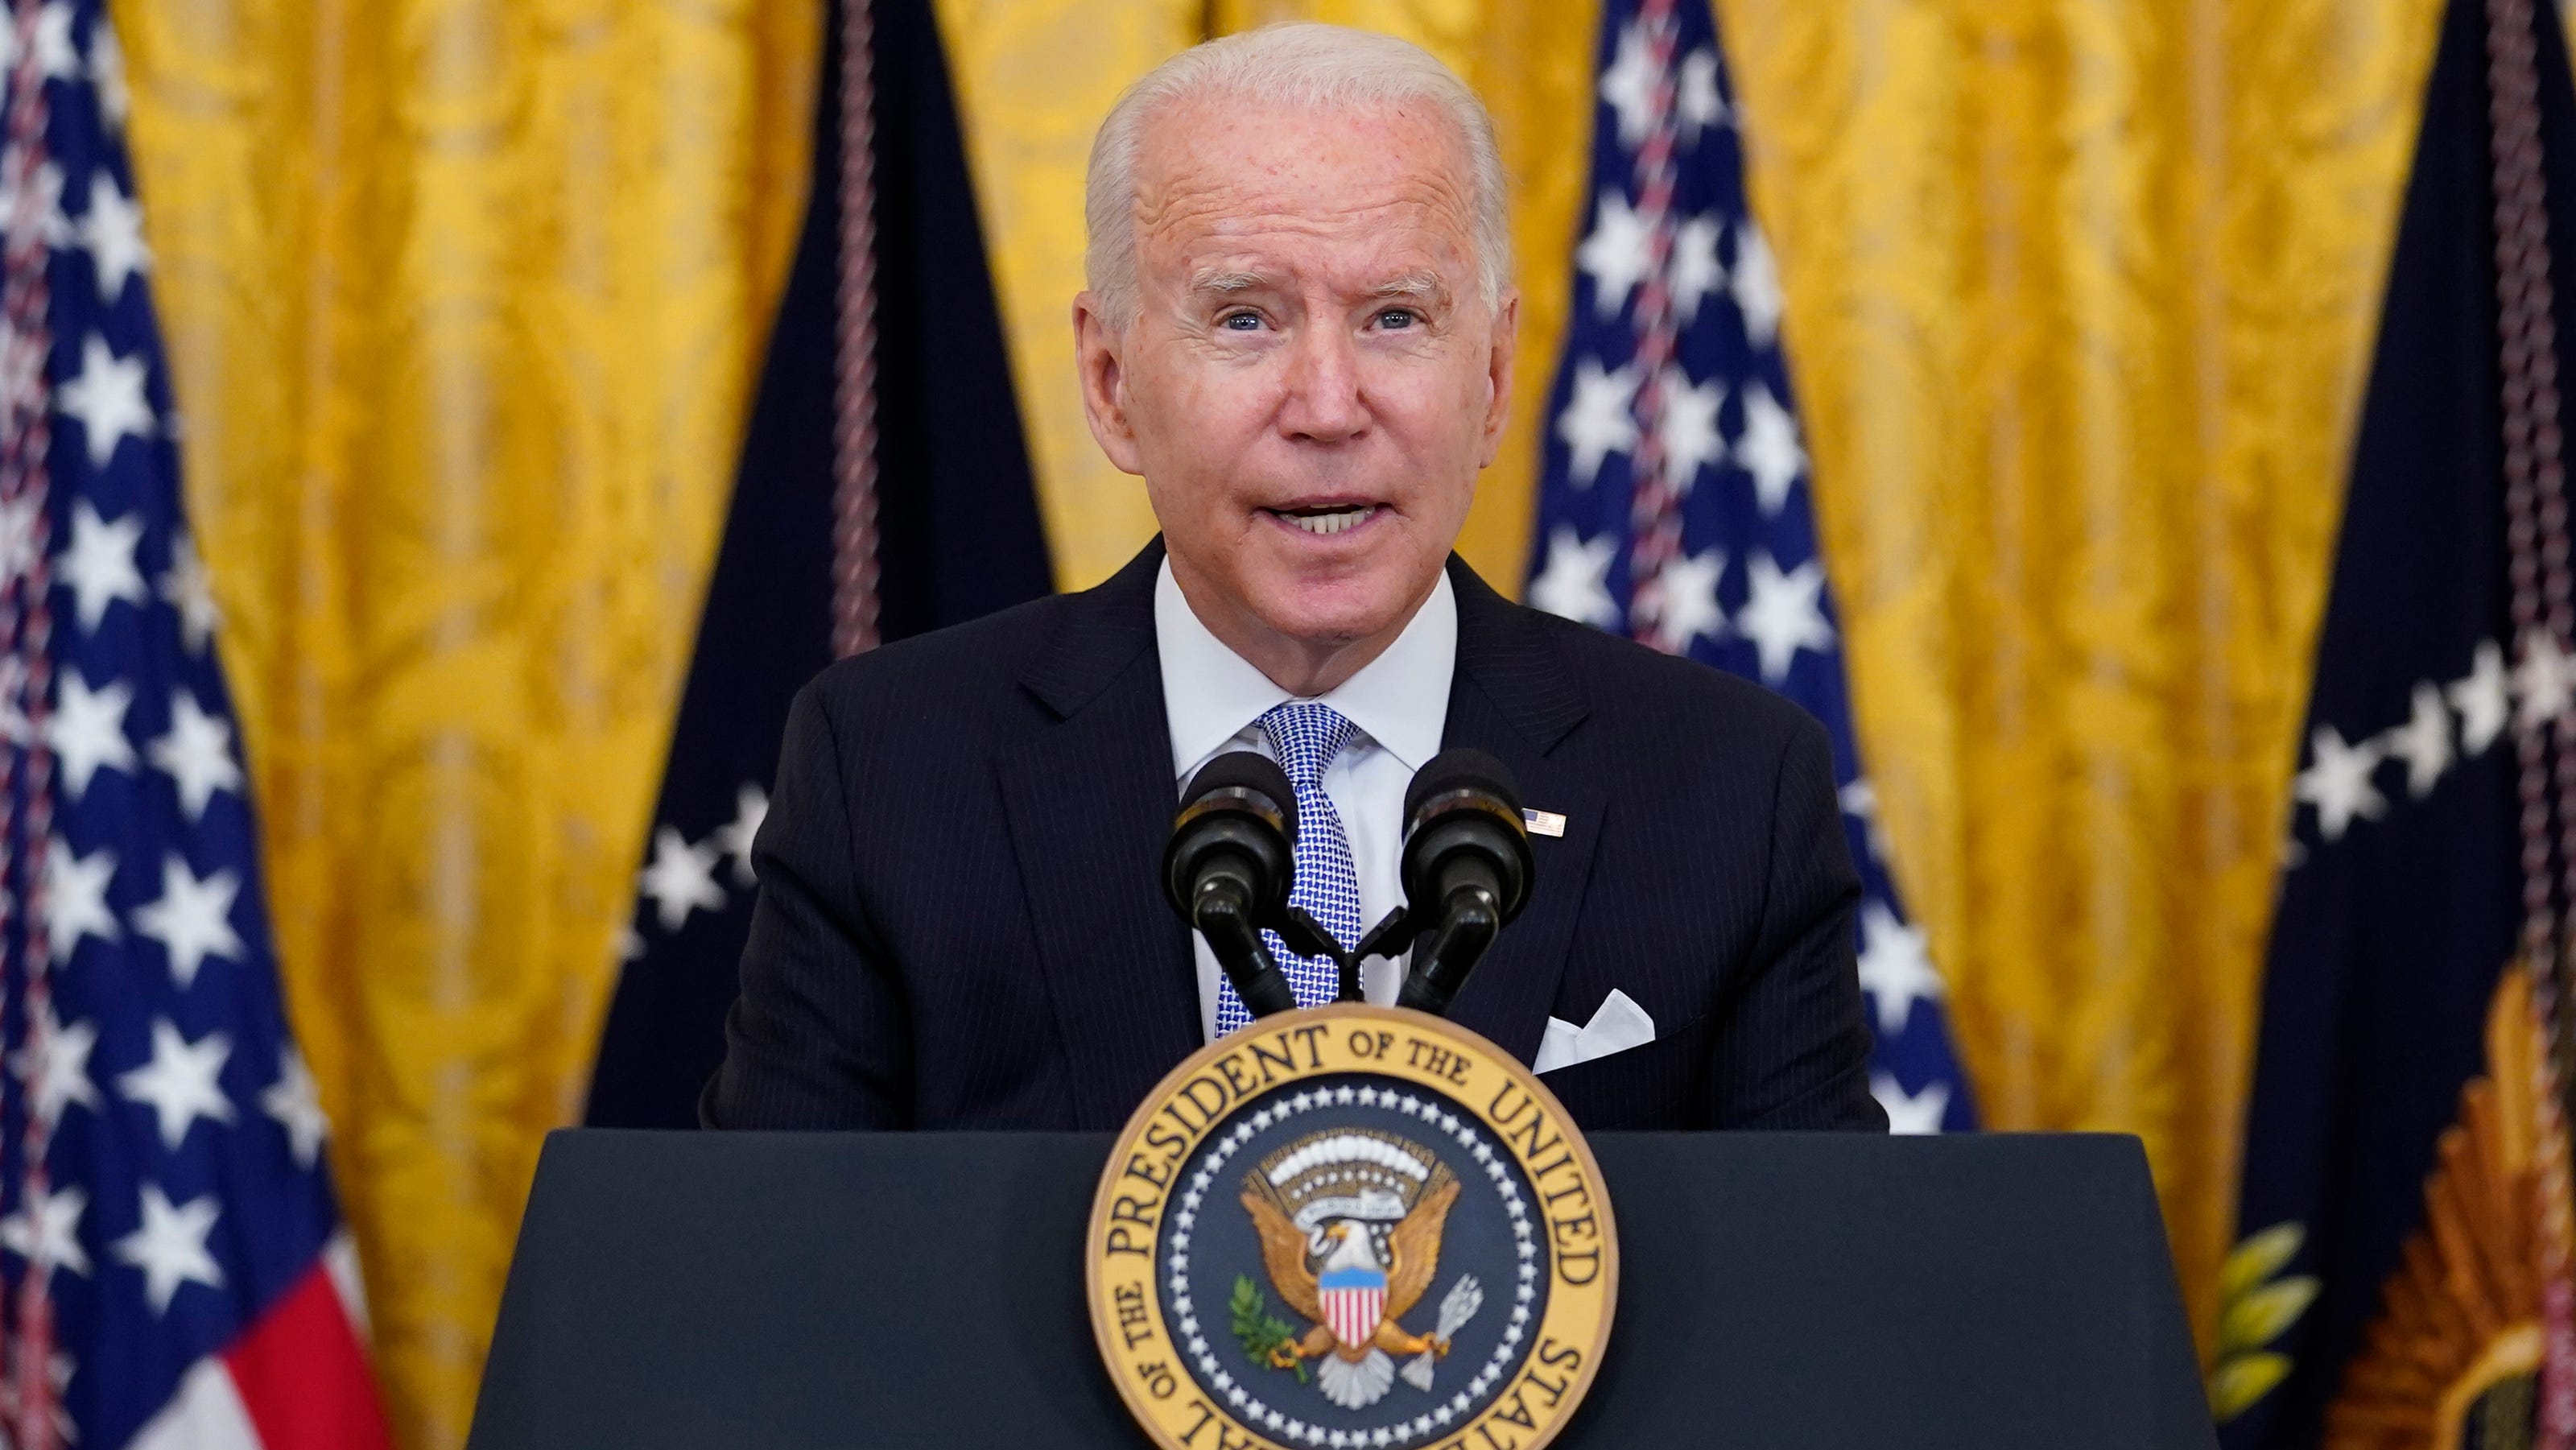 Climate and refugee organizations say Biden has power to help address climate change-driven displacement - USA TODAY